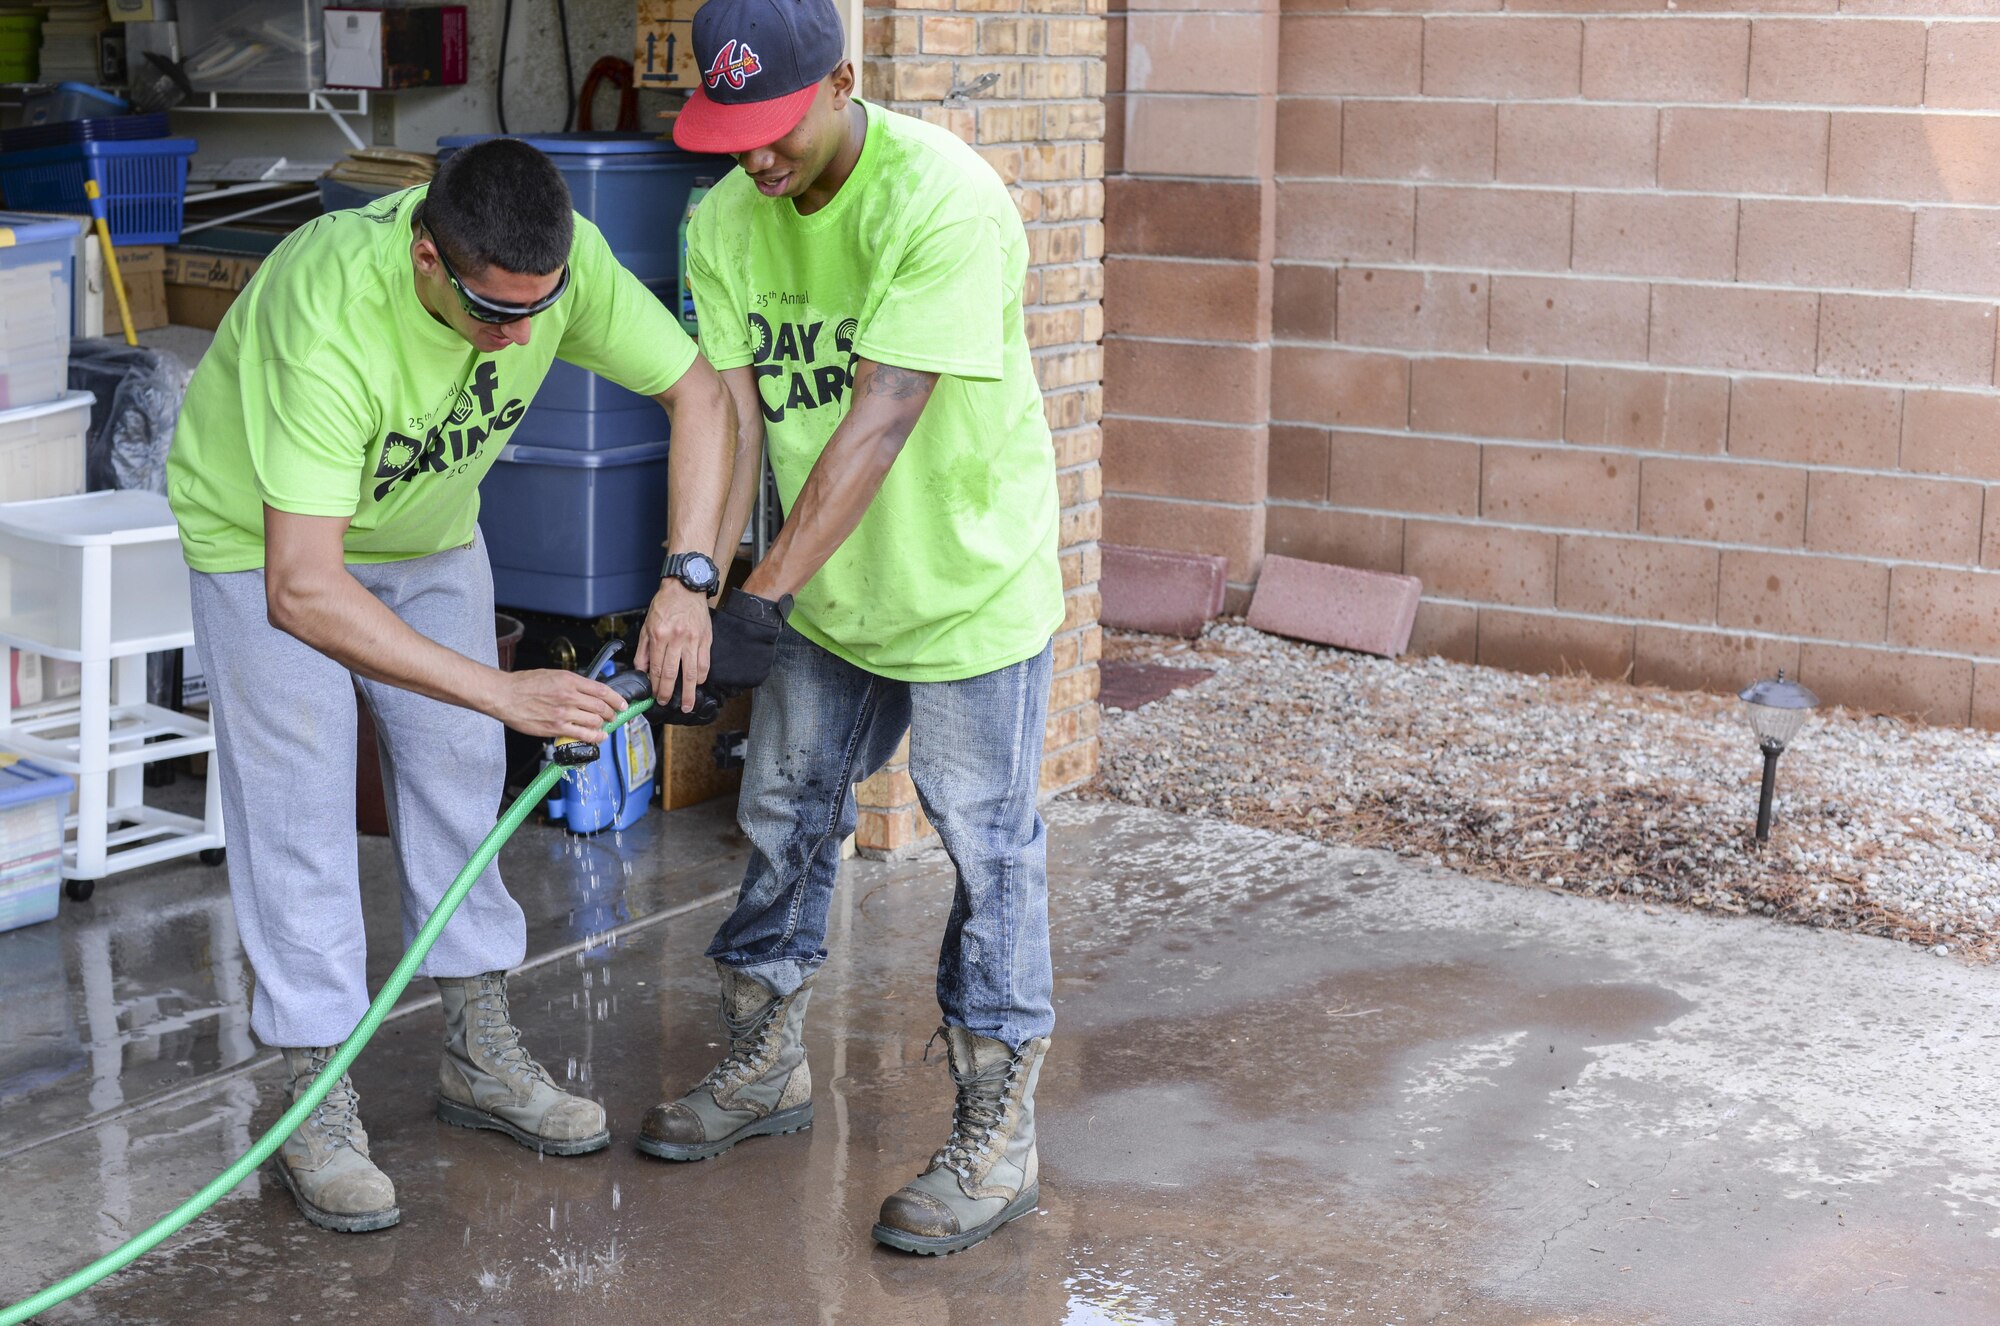 Airmen 1st Class Michael and Shawndell, Day of Caring volunteers, who are both heating, ventilation and air conditioning technicians with the 49th Civil Engineer Squadron here, fix a disabled resident’s faulty watering hose in Alamogordo, N.M. on Sept. 9, 2016. Hundreds of Holloman Airmen volunteered for the 25th annual Day of Caring. (Last names are being withheld due to operational requirements. U.S. Air Force photo by Airman Alexis P. Docherty)